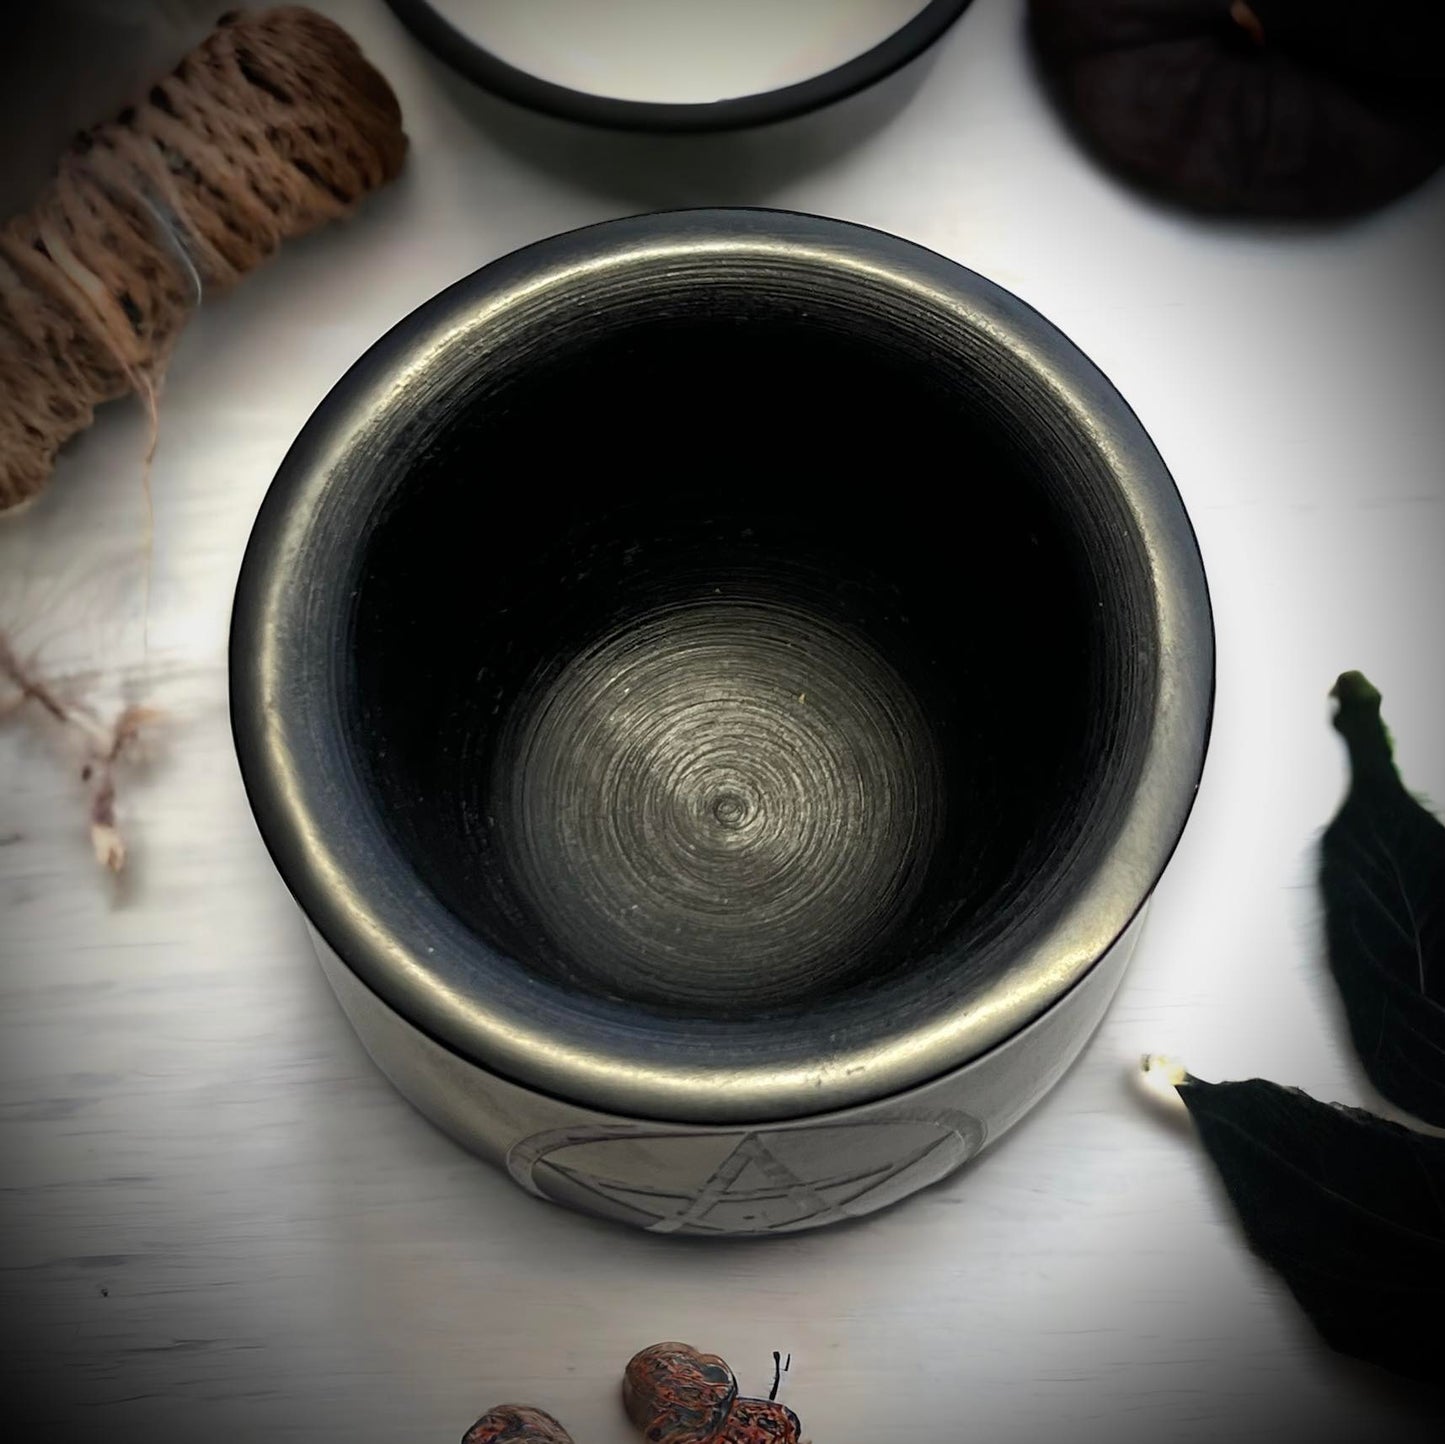 Soapstone 4" Mortar & Pestle Engraved Pentacle Black, Witch, Ritual Candle, Small Bulk Candles, Witchcraft Oddity Occult Unique Gift Idea